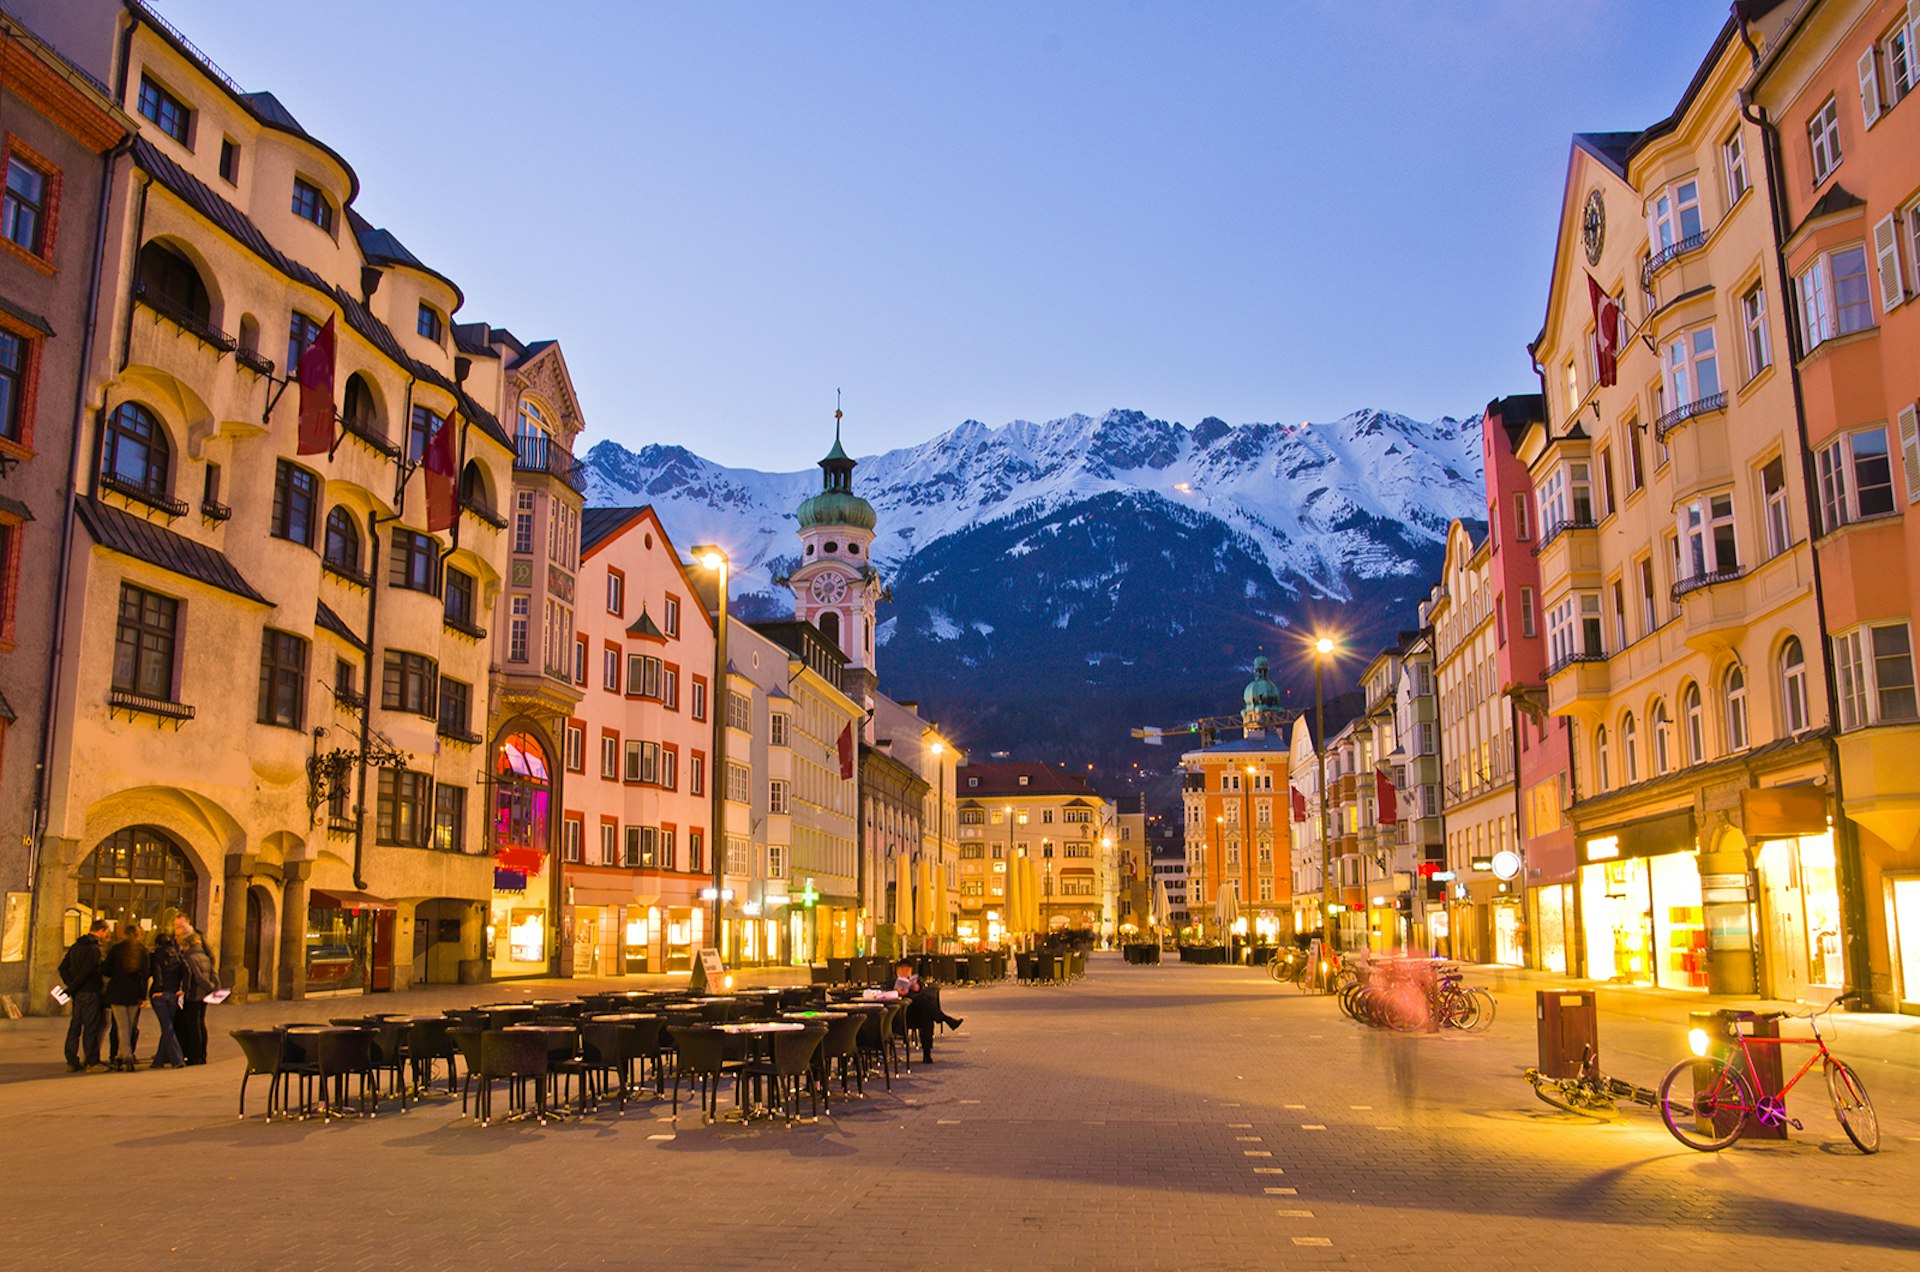 A city street with snow-covered mountains looming in the background, Innsbruck, Austria